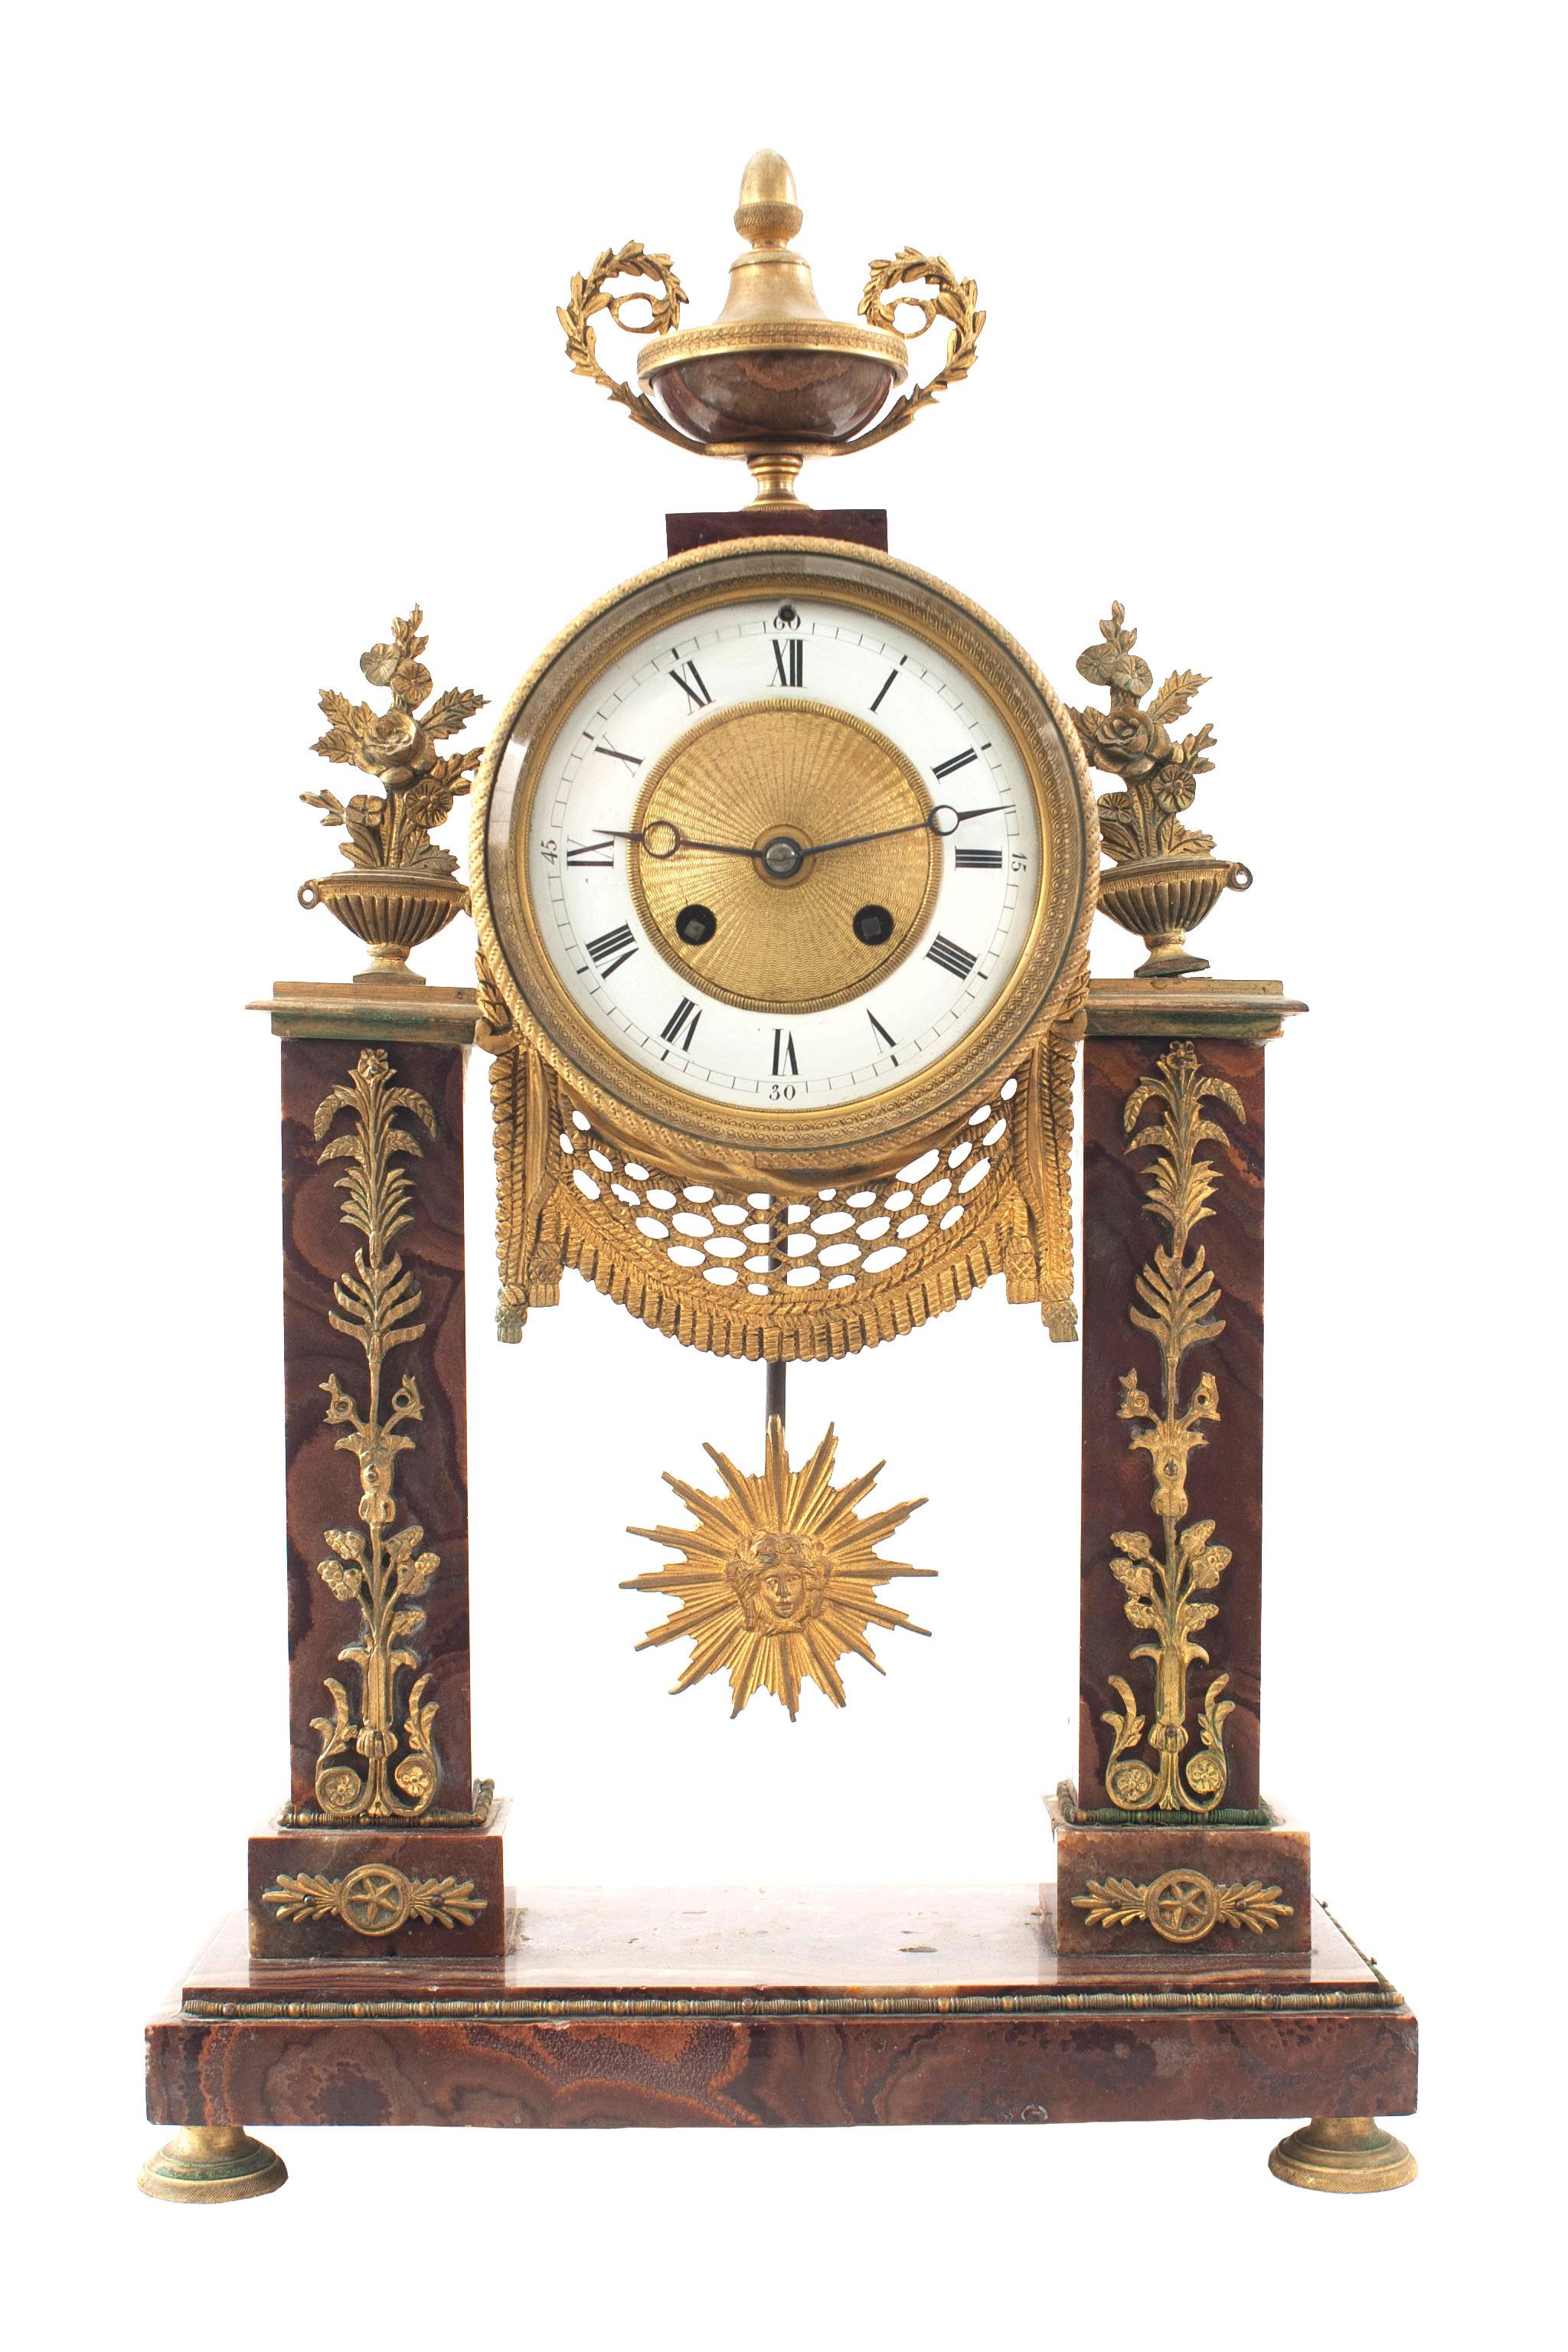 3-Piece French Louis XVI-style (19th Century) rouge marble and bronze dore clock set with Pair of candelabra. (18